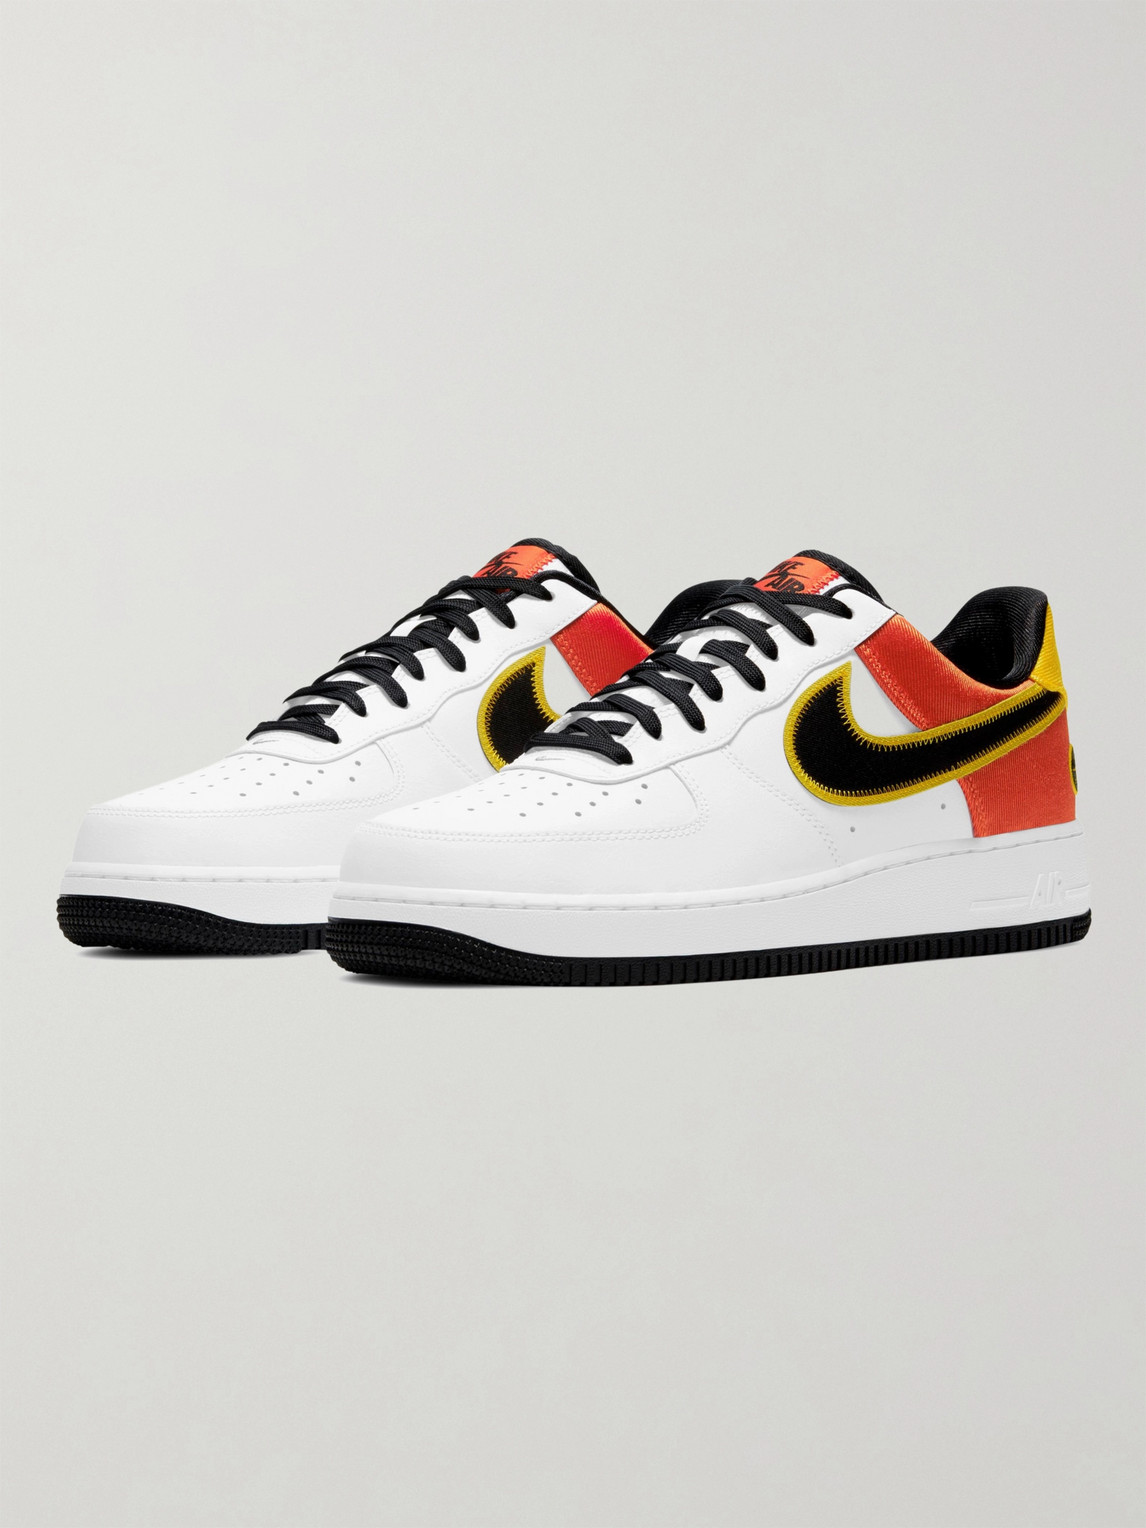 NIKE AIR FORCE 1 07 LV8 RAYGUNS SATIN-TRIMMED LEATHER SNEAKERS